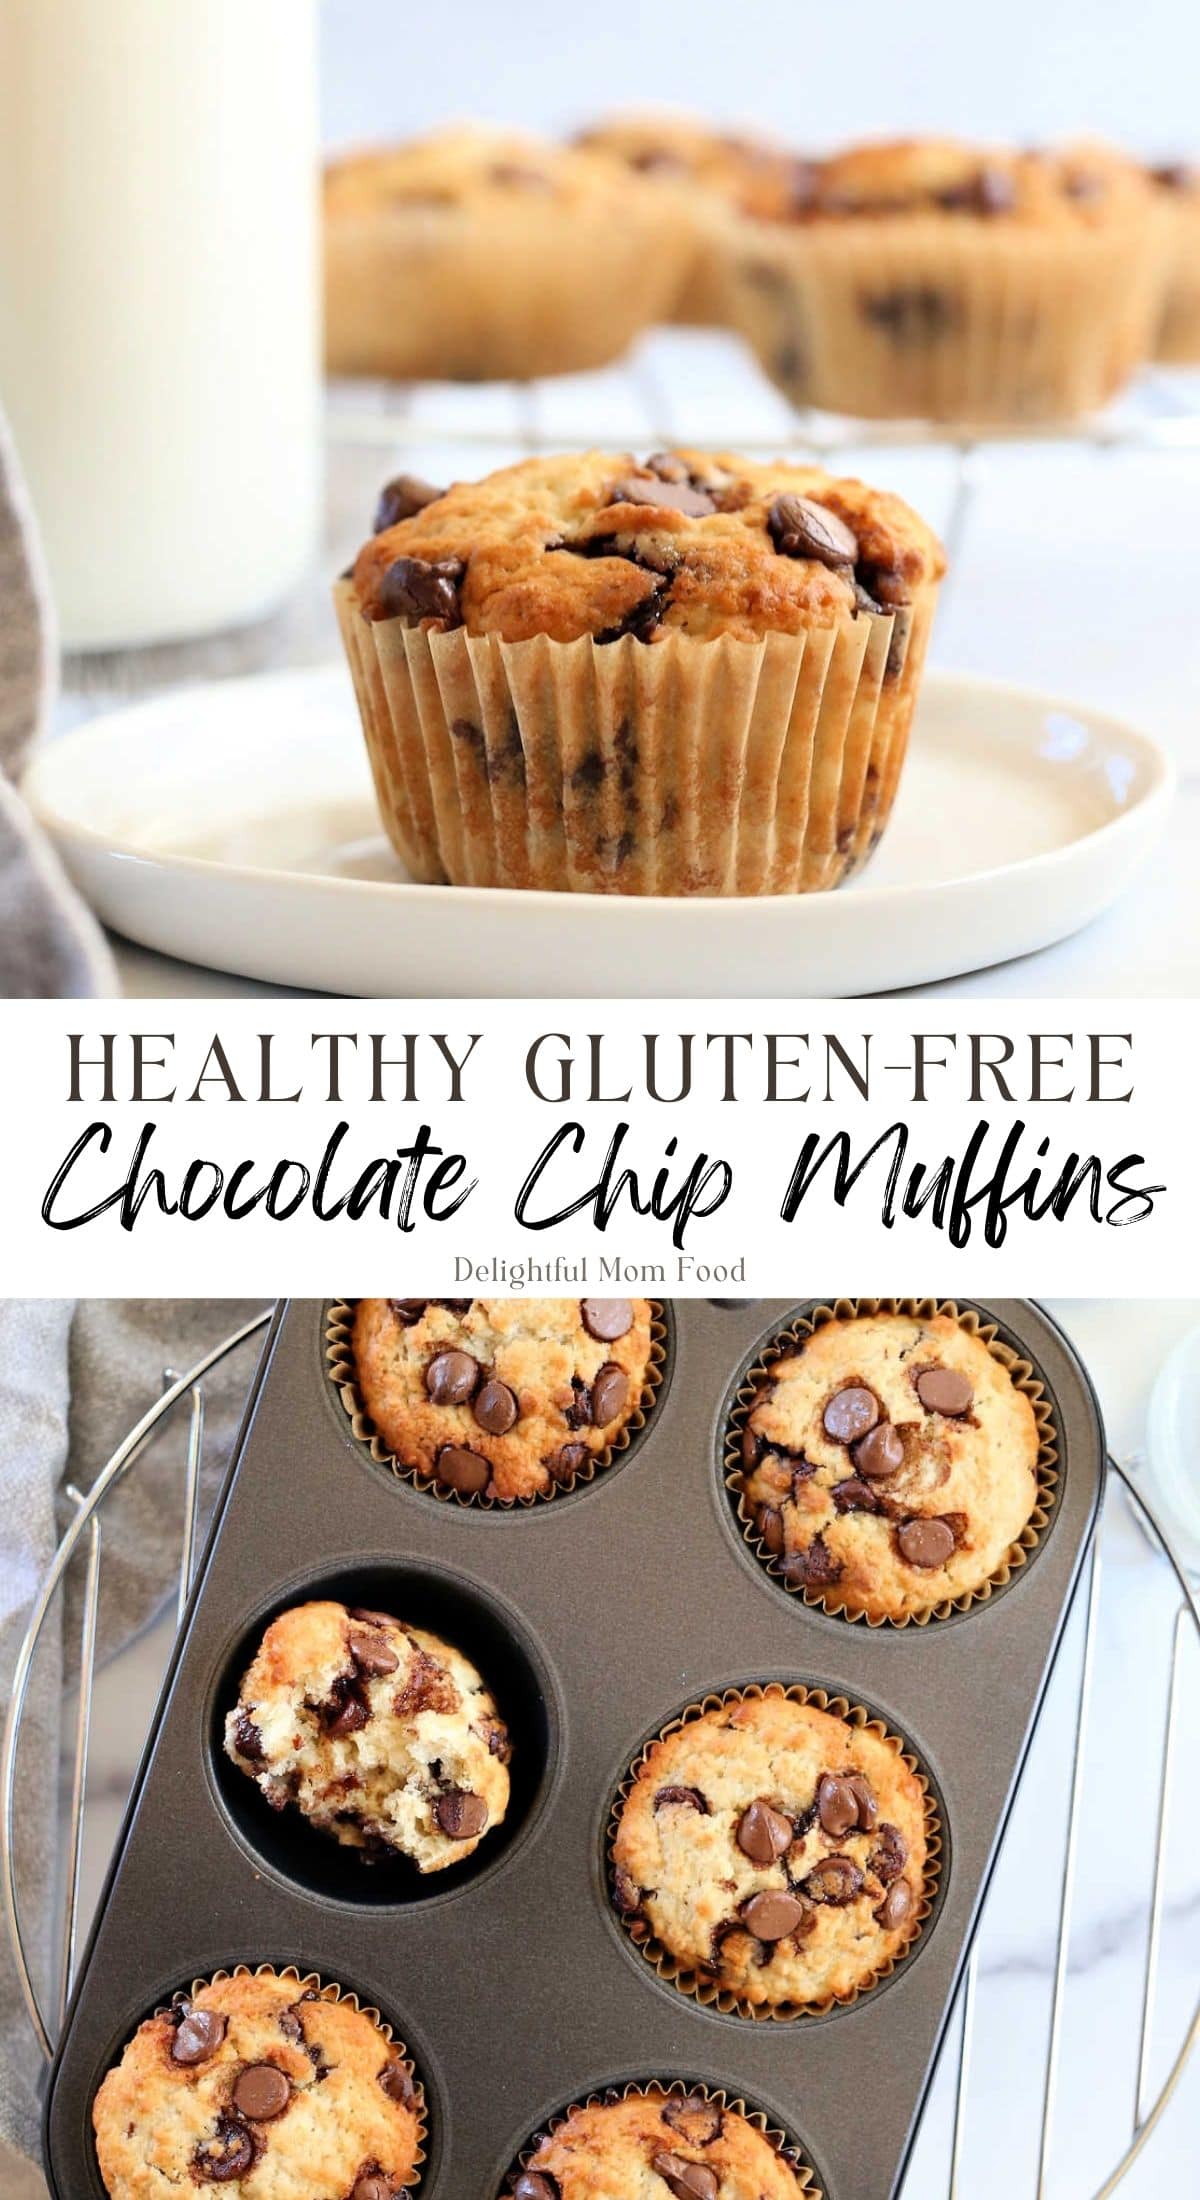 Healthy chocolate chip muffins recipe with oats